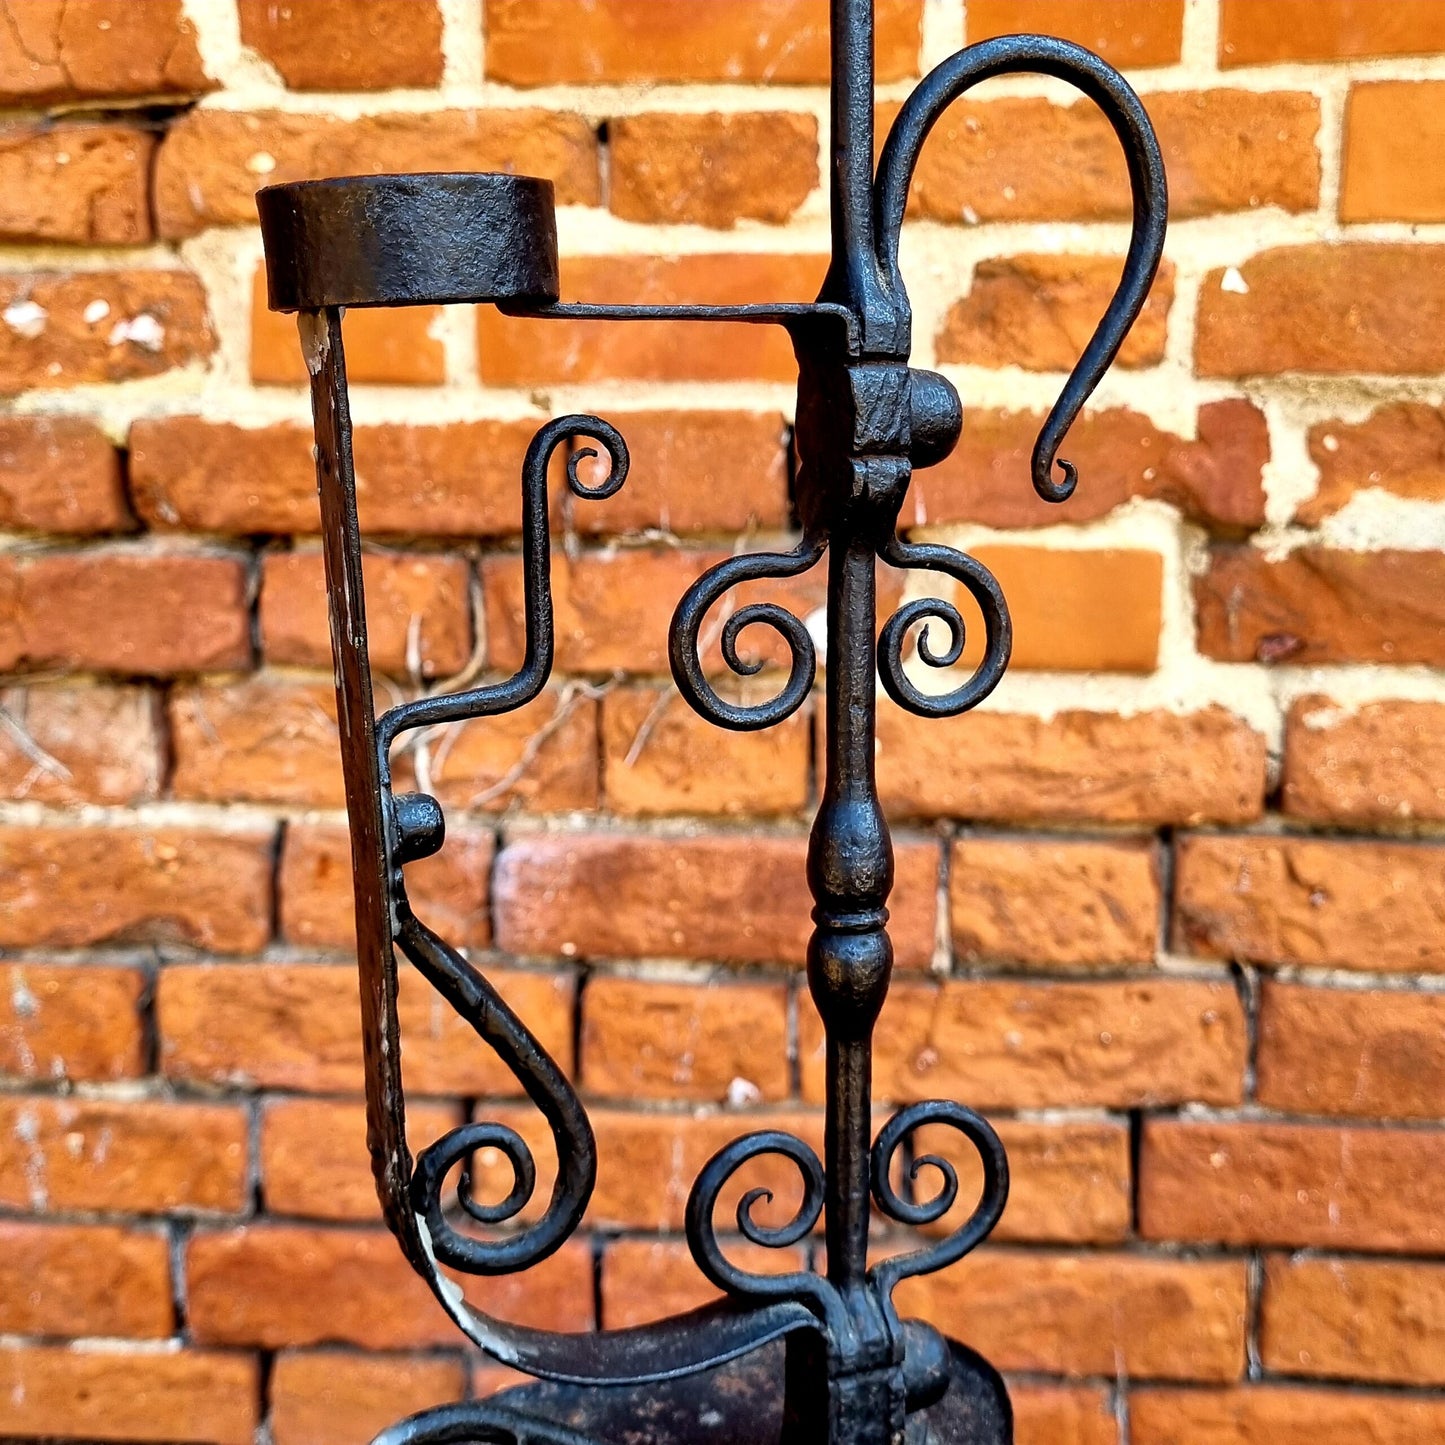 Mid 18th Century Antique Wrought Iron Candlestick or Candleholder